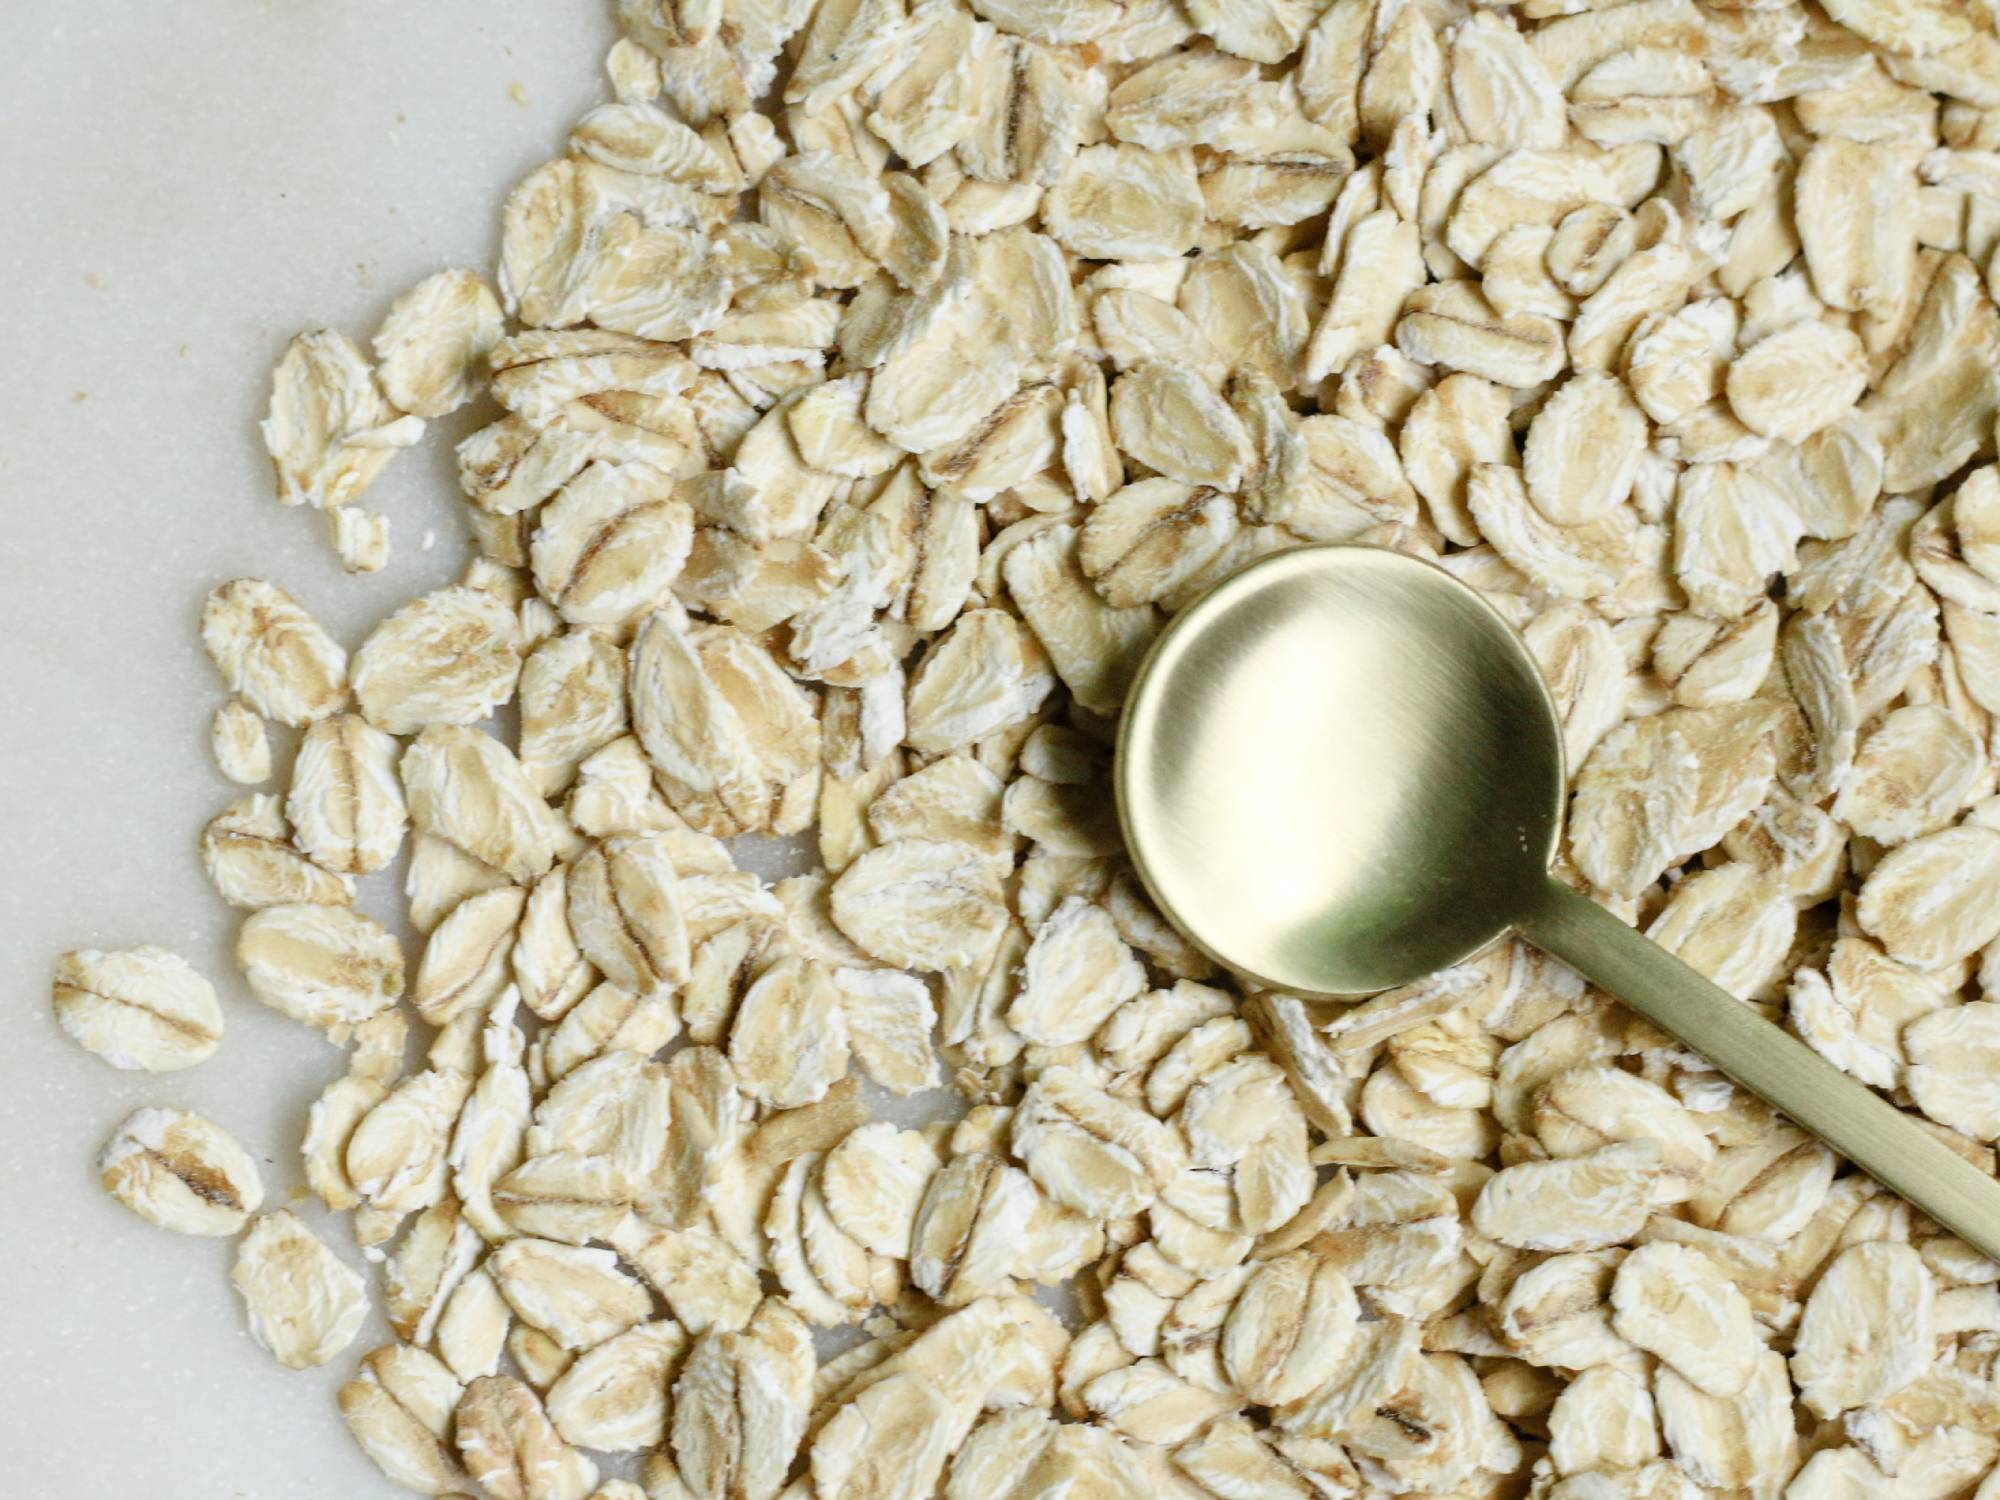 How to make oat milkwith science